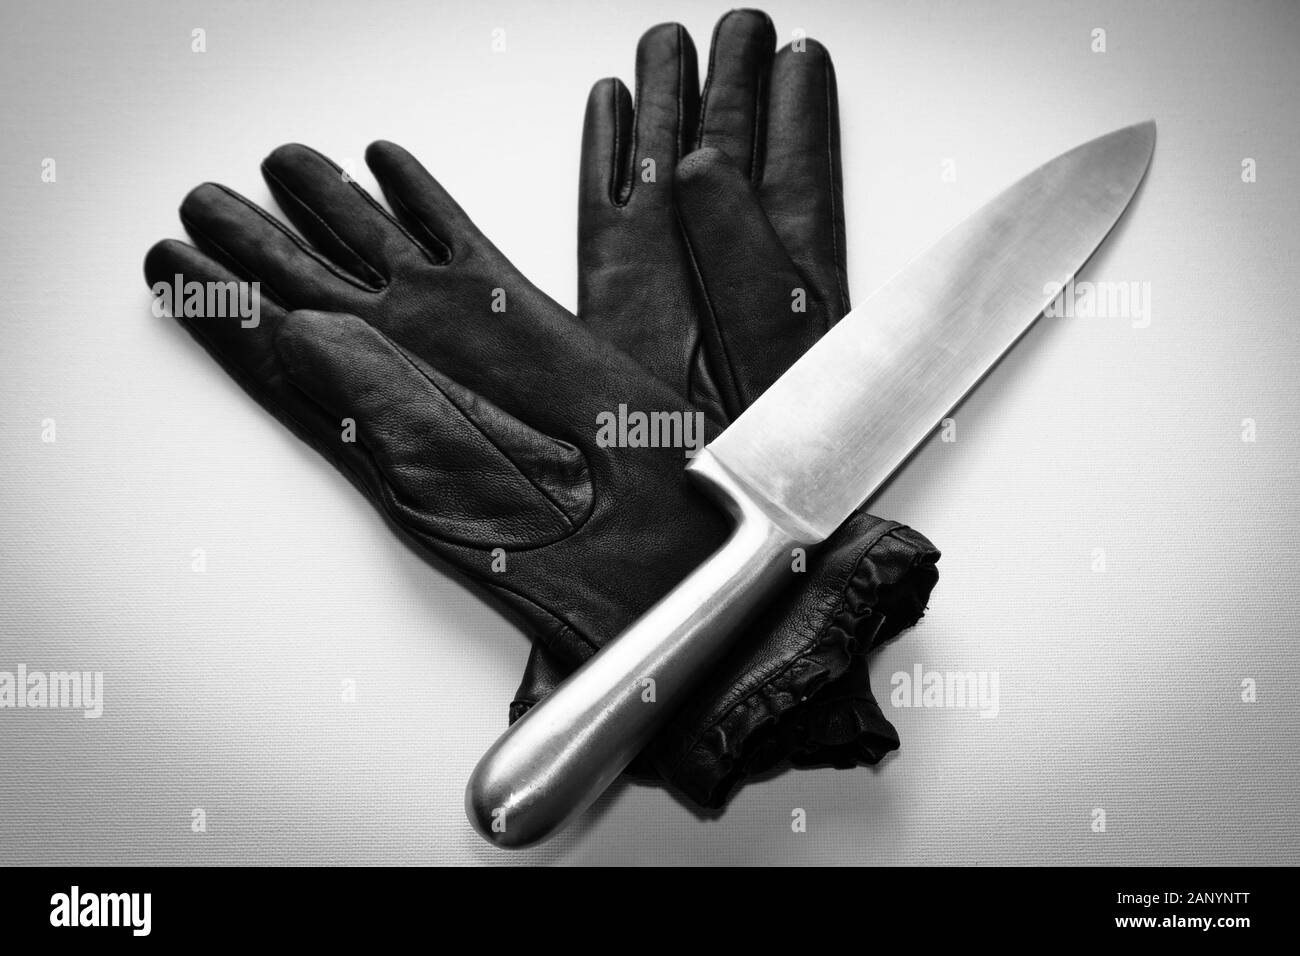 Overhead shot of a metal knife over black gloves on a  white surface Stock Photo